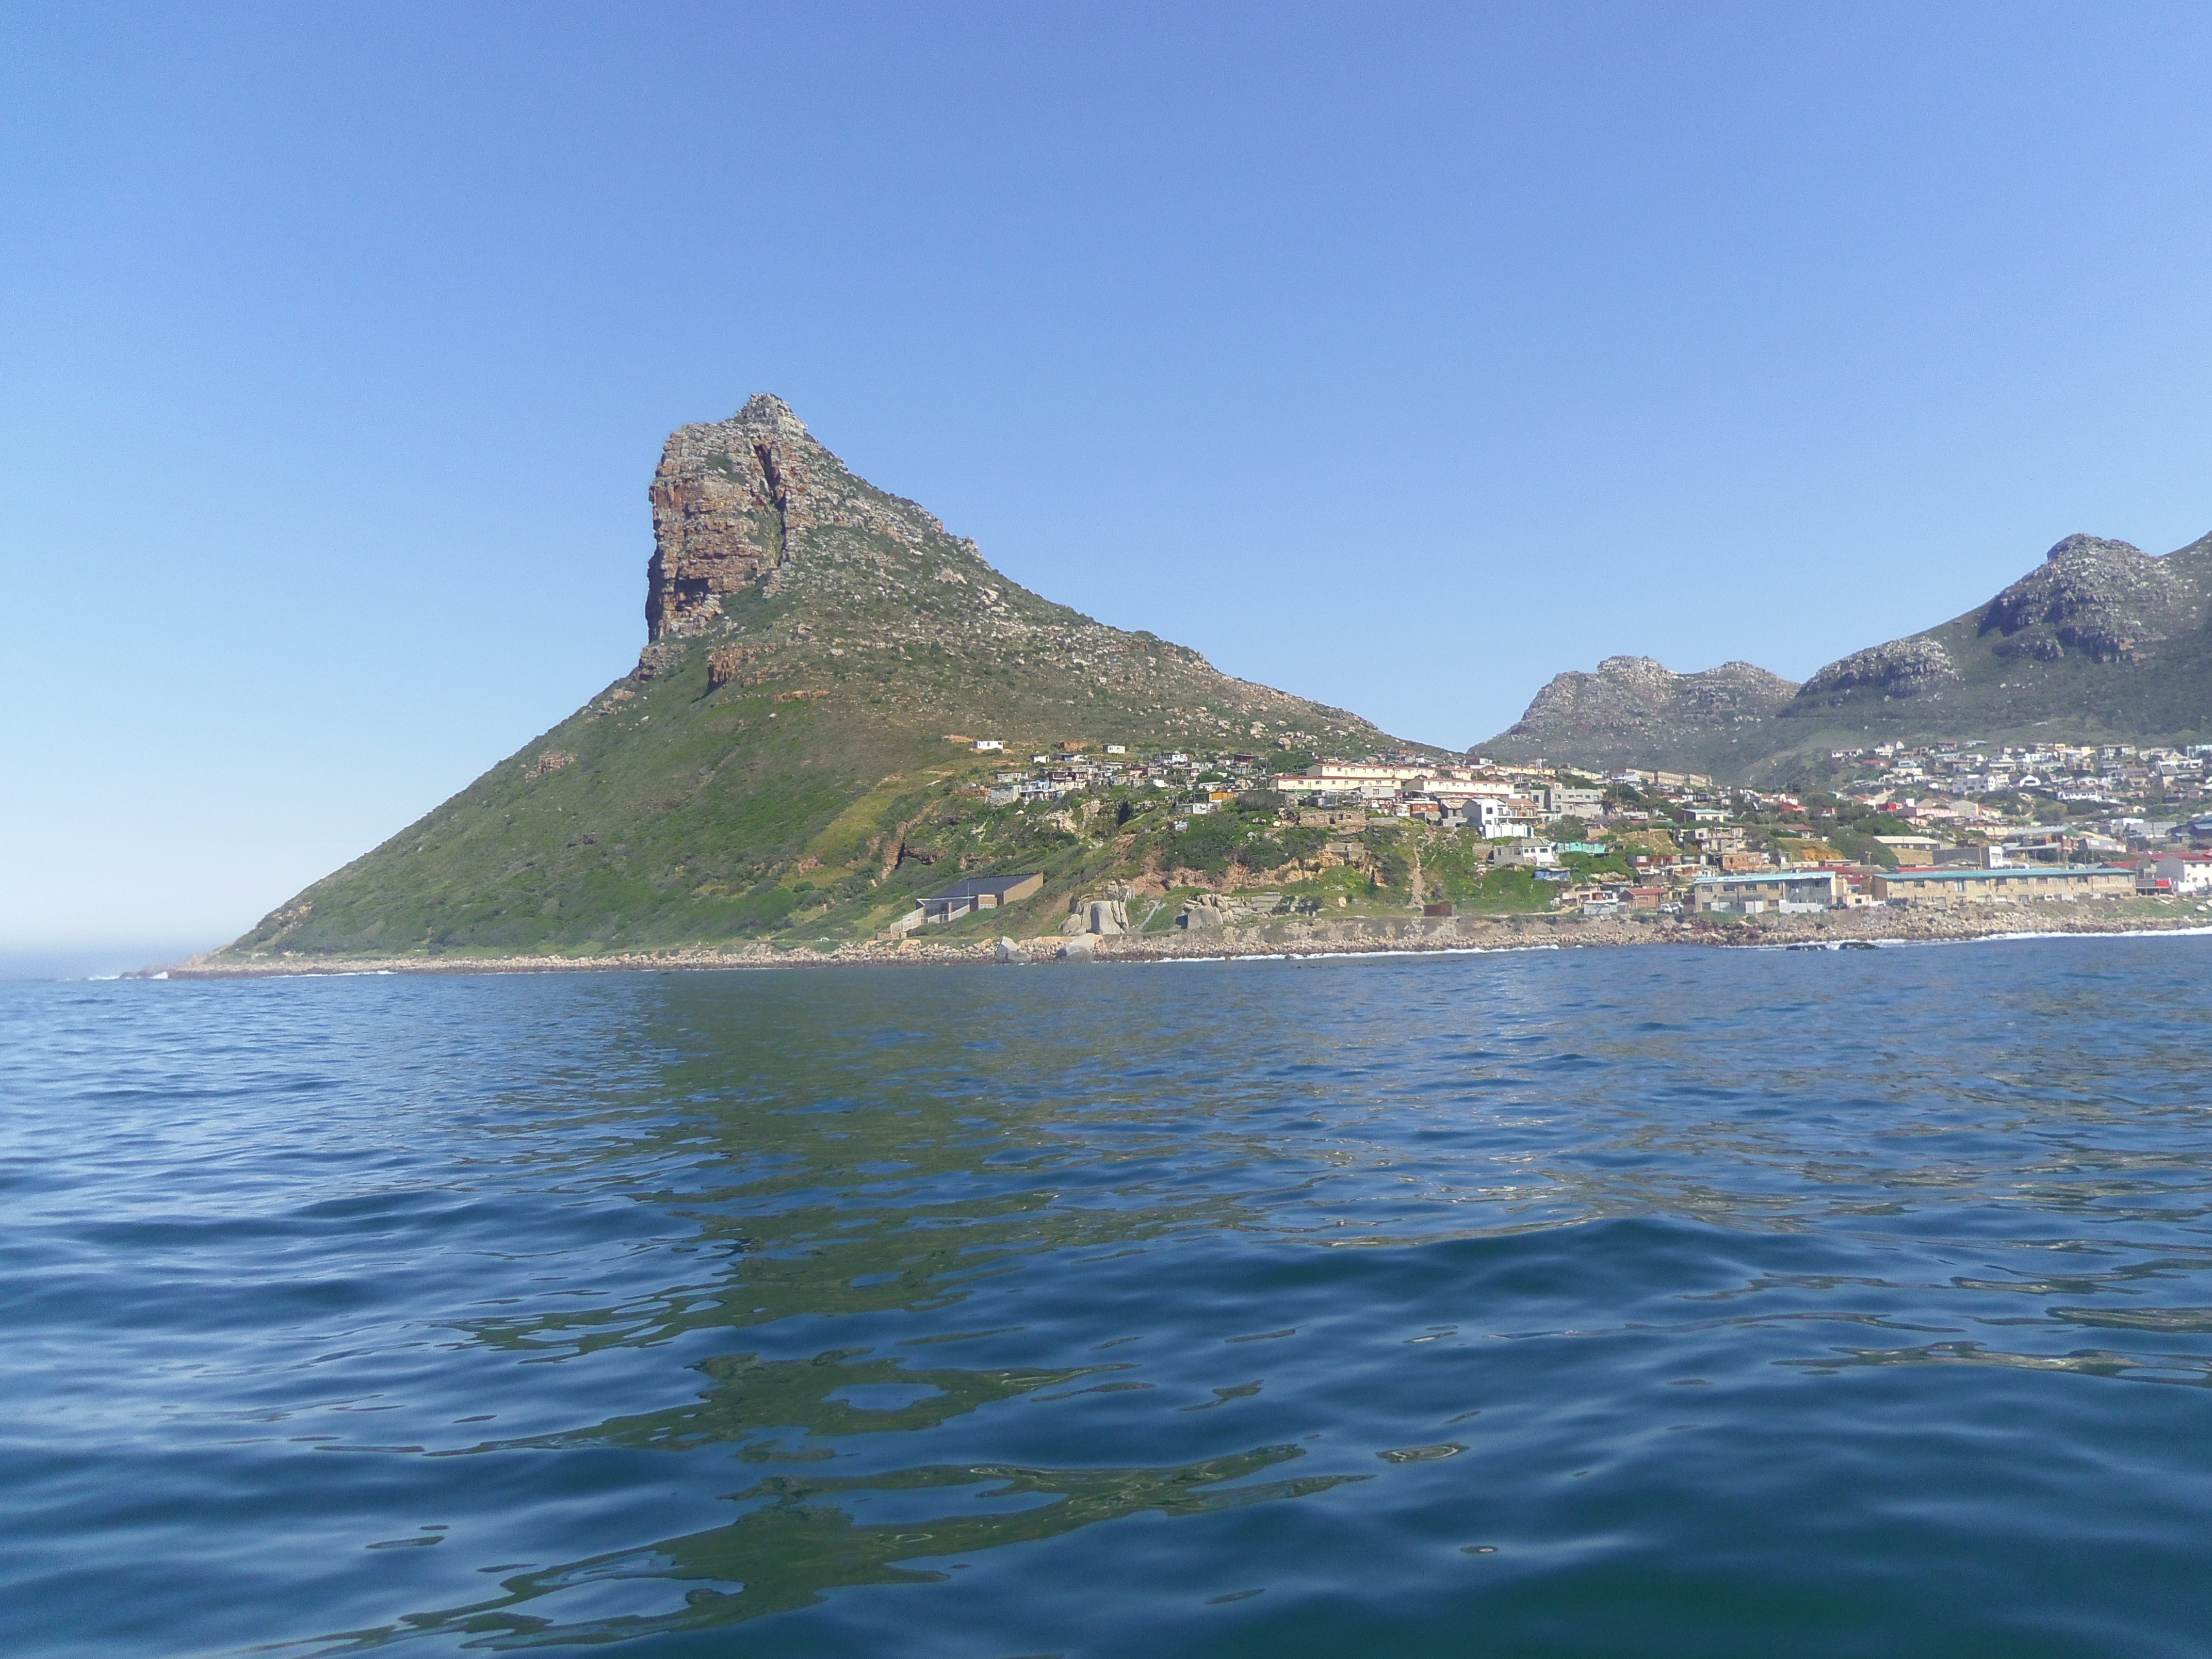 A view of a poorer neighborhood in Cape Town, taken from a boat